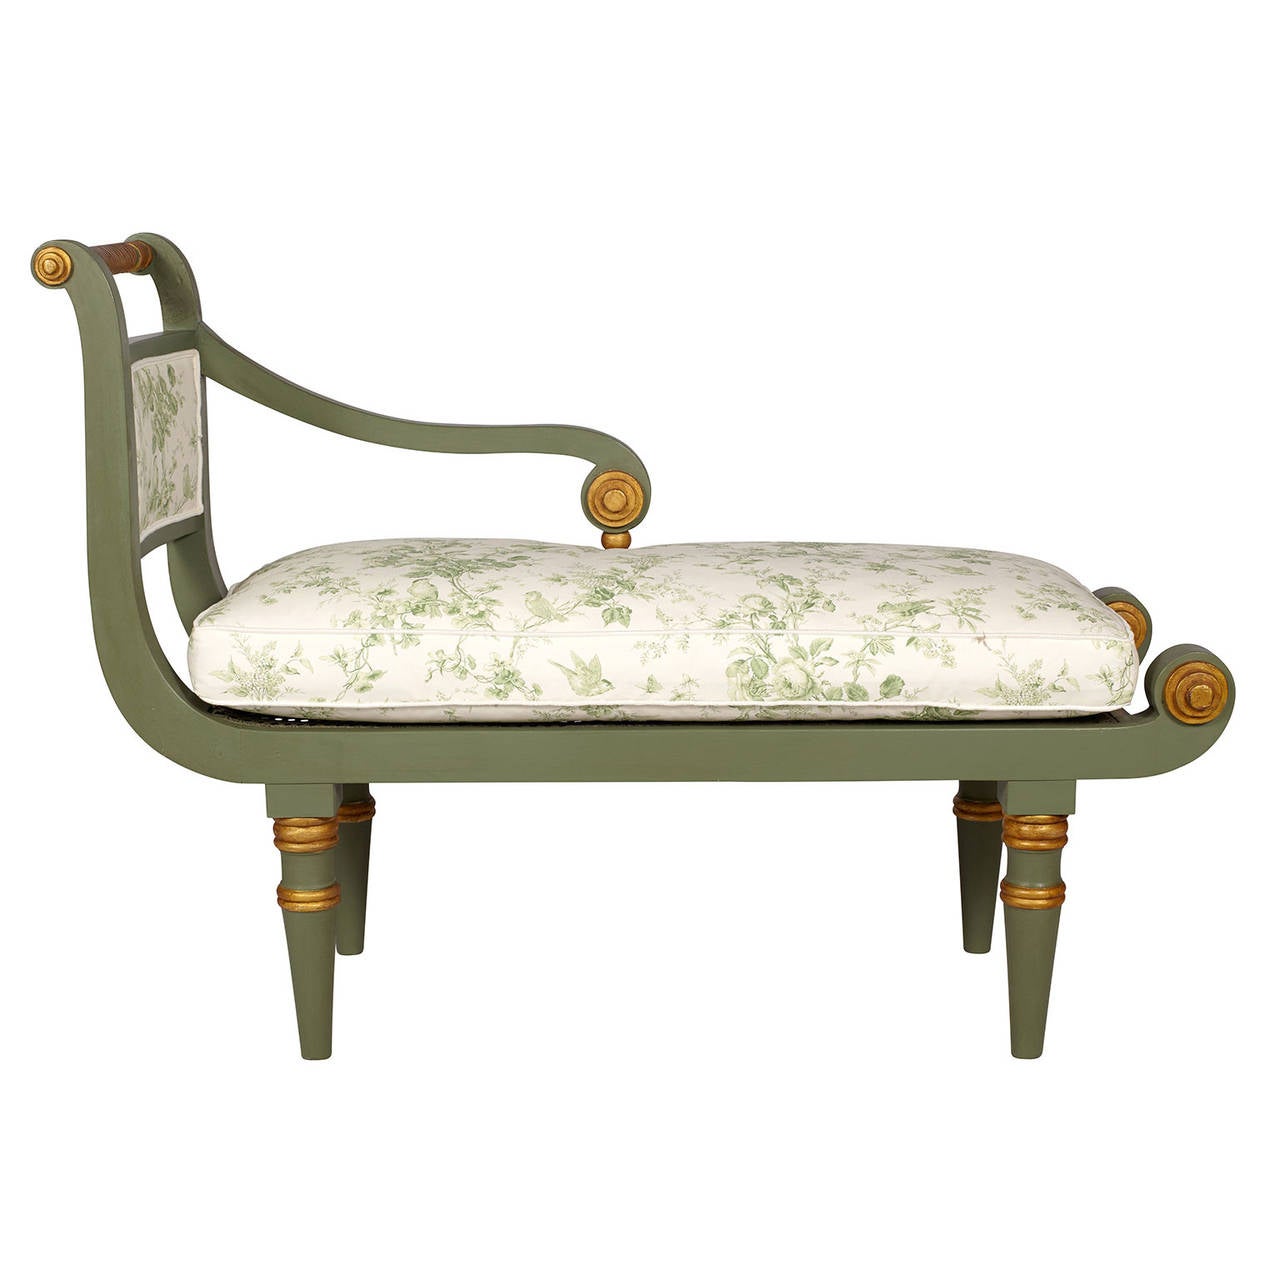 A lovely English Regency scroll end bench or settee in a unique green and antiqued gold detail. Newly upholstered removable cushion.